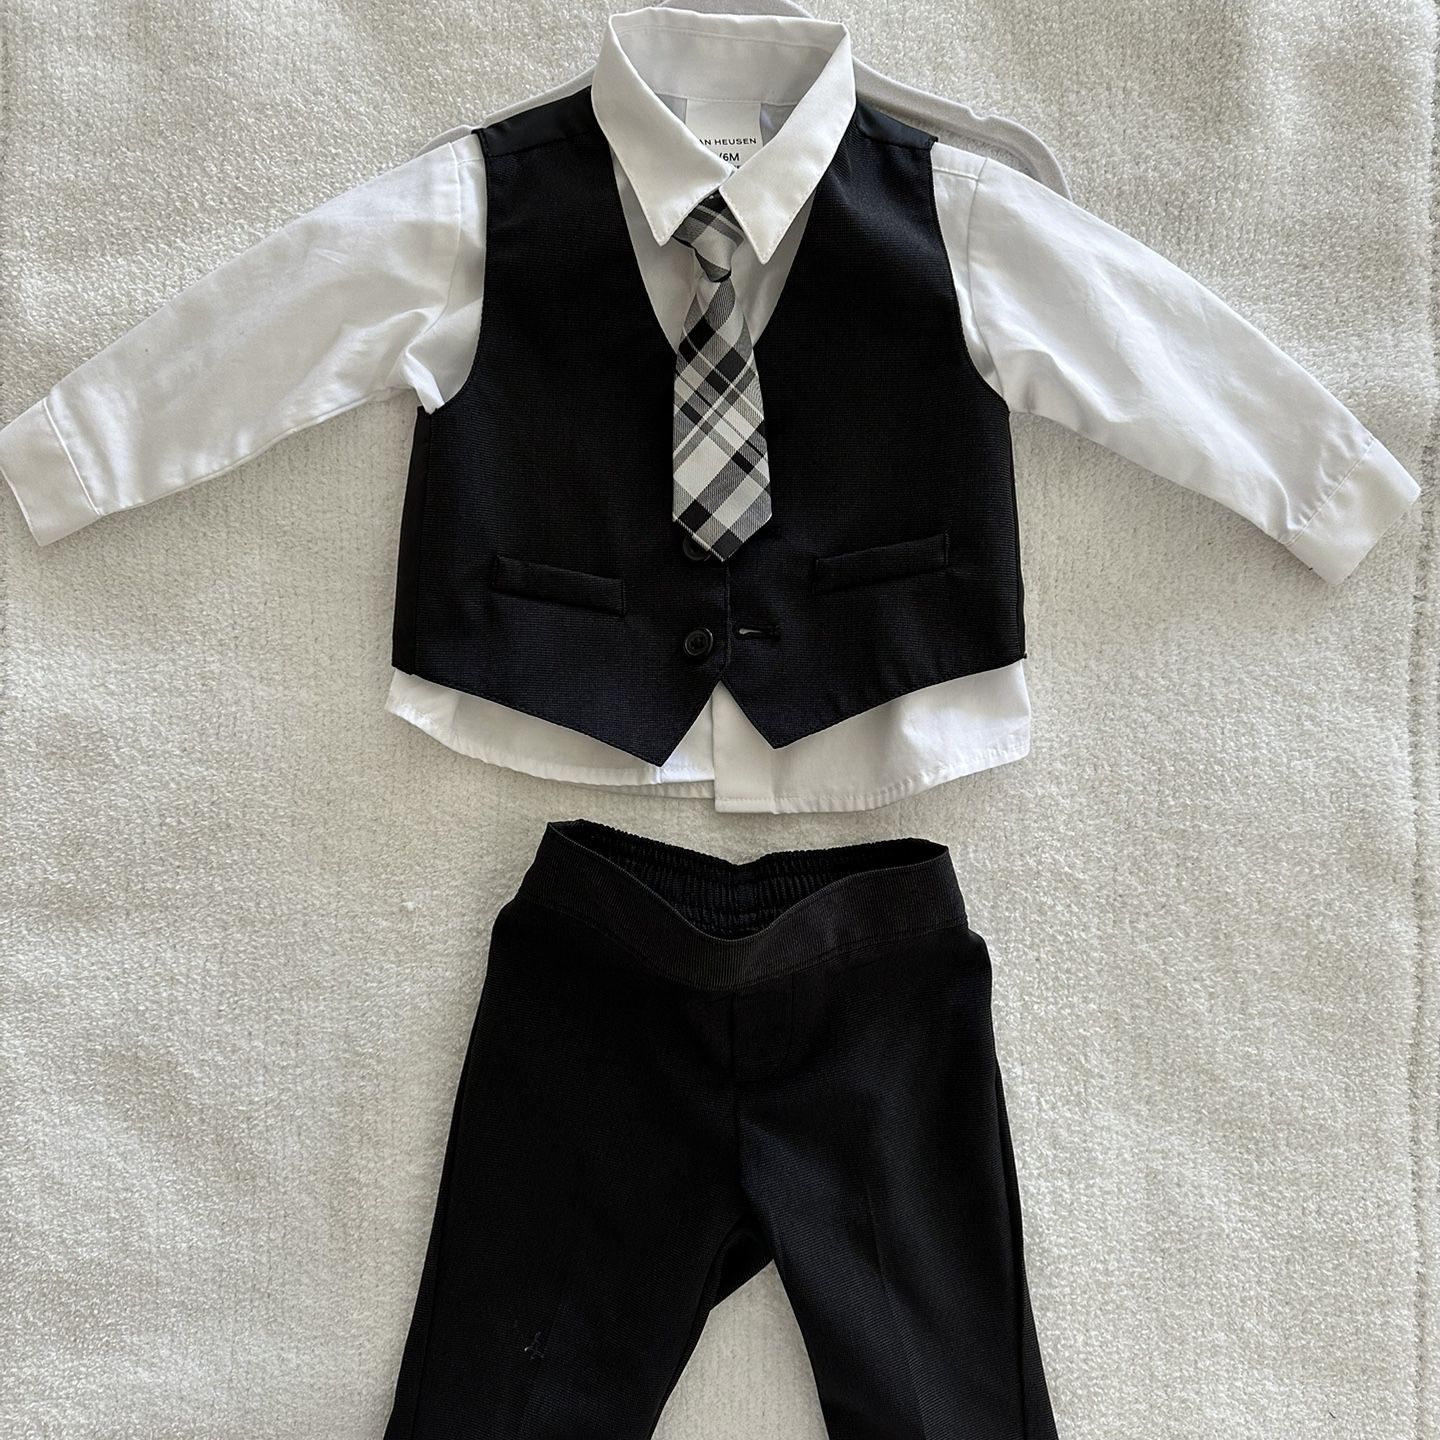  Baby Tuxedo Set Like-New (3-6 Months) - Worn Once